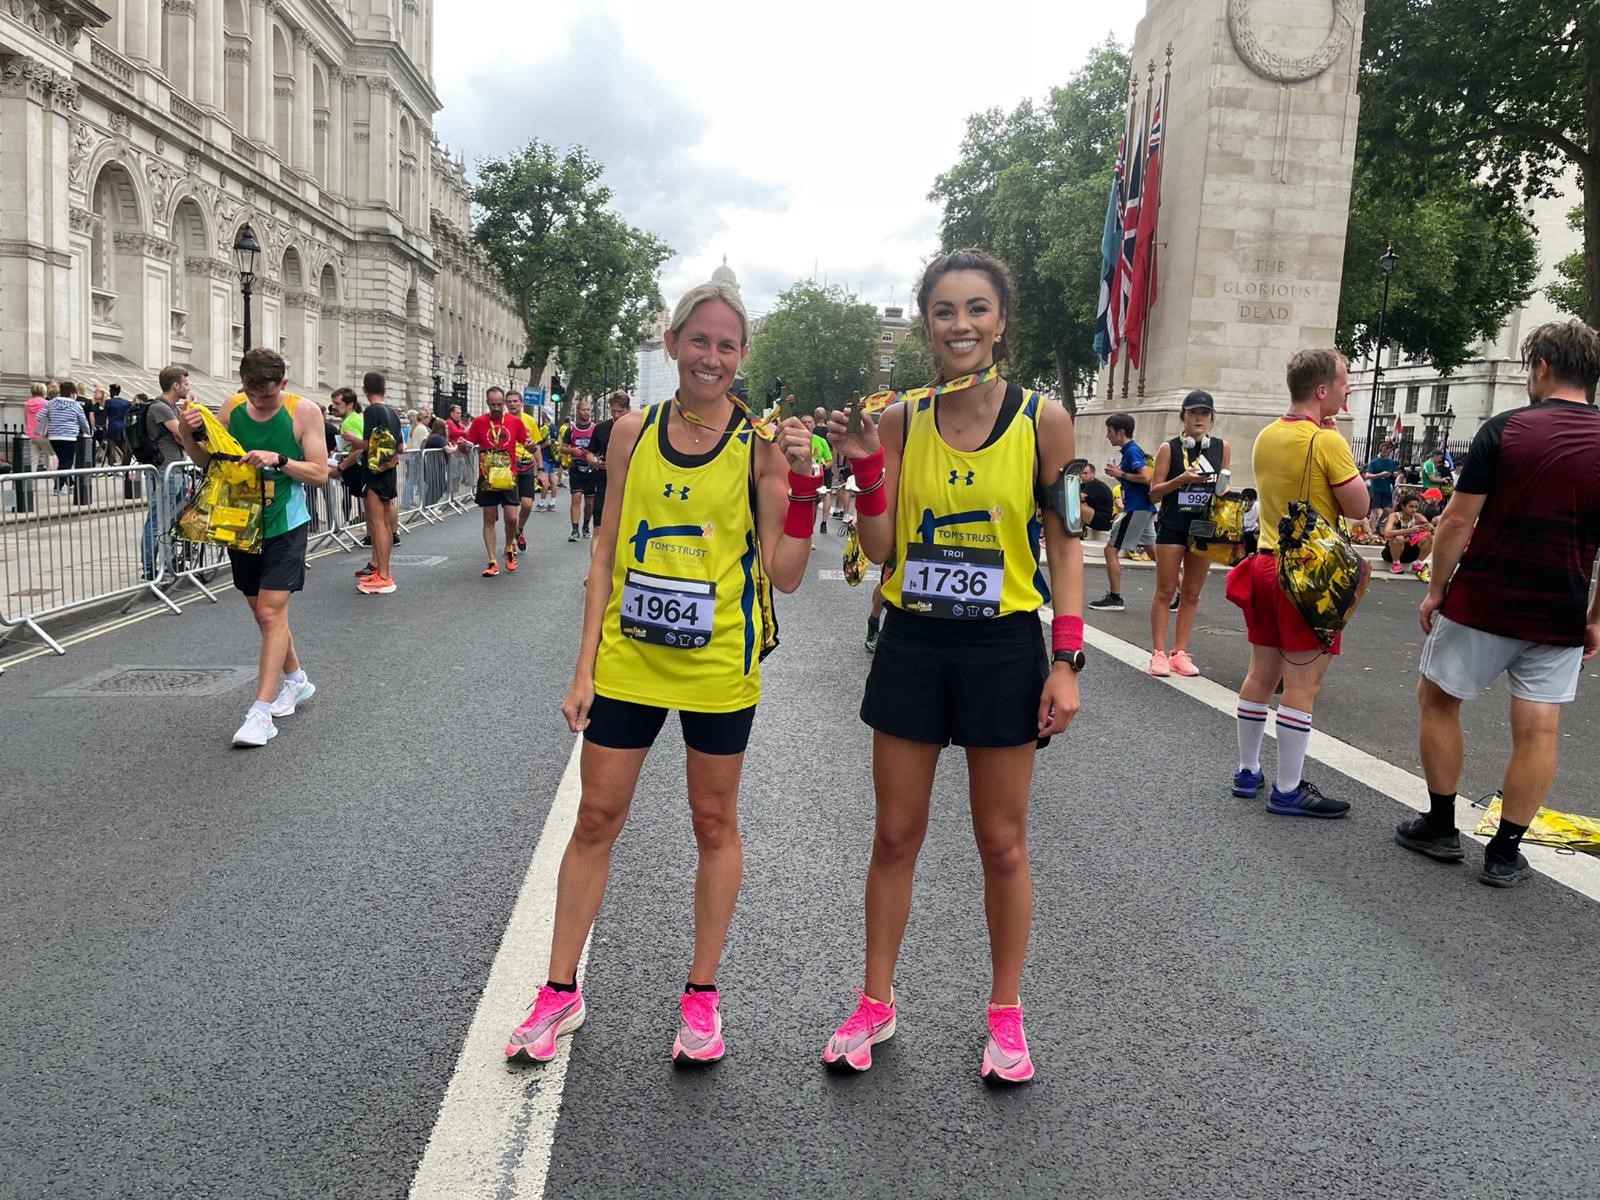 Kerry and Troi in their Tom's Trust running vests during a race